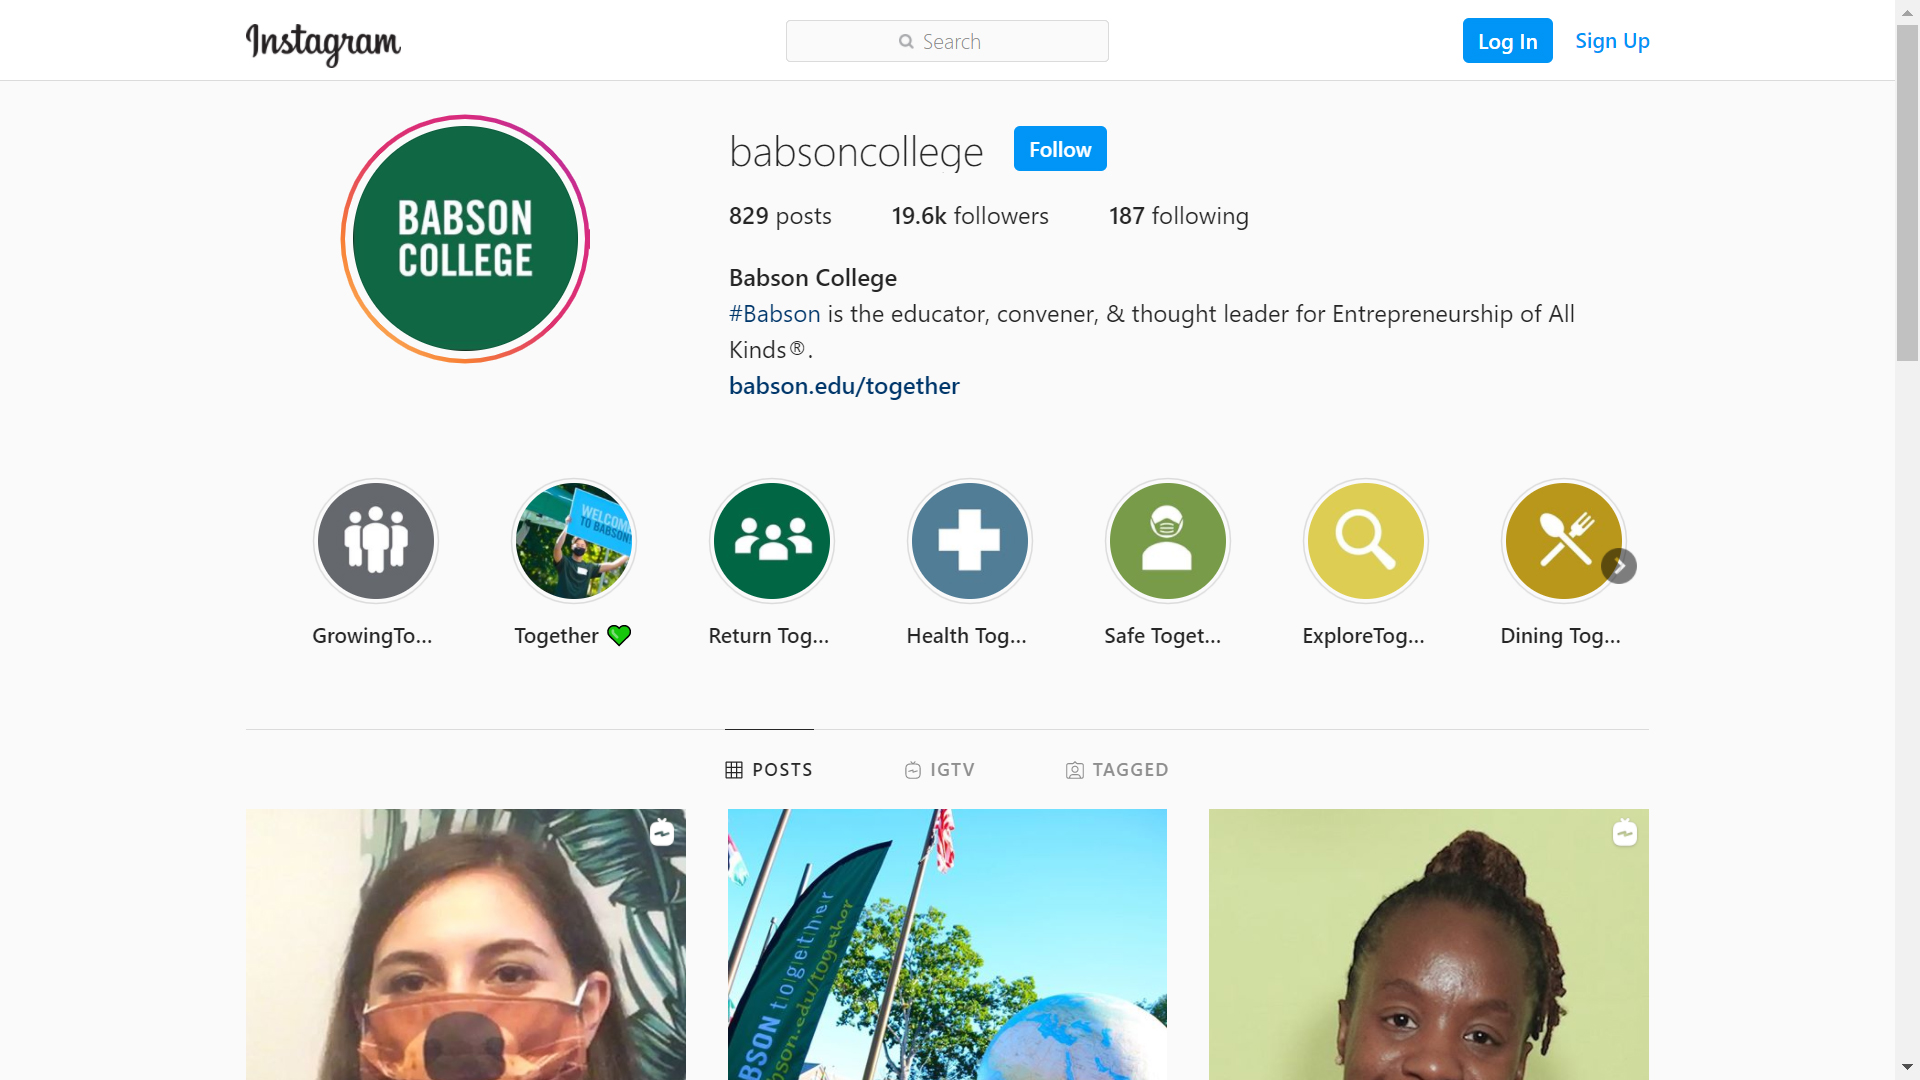 Babson College on Instagram